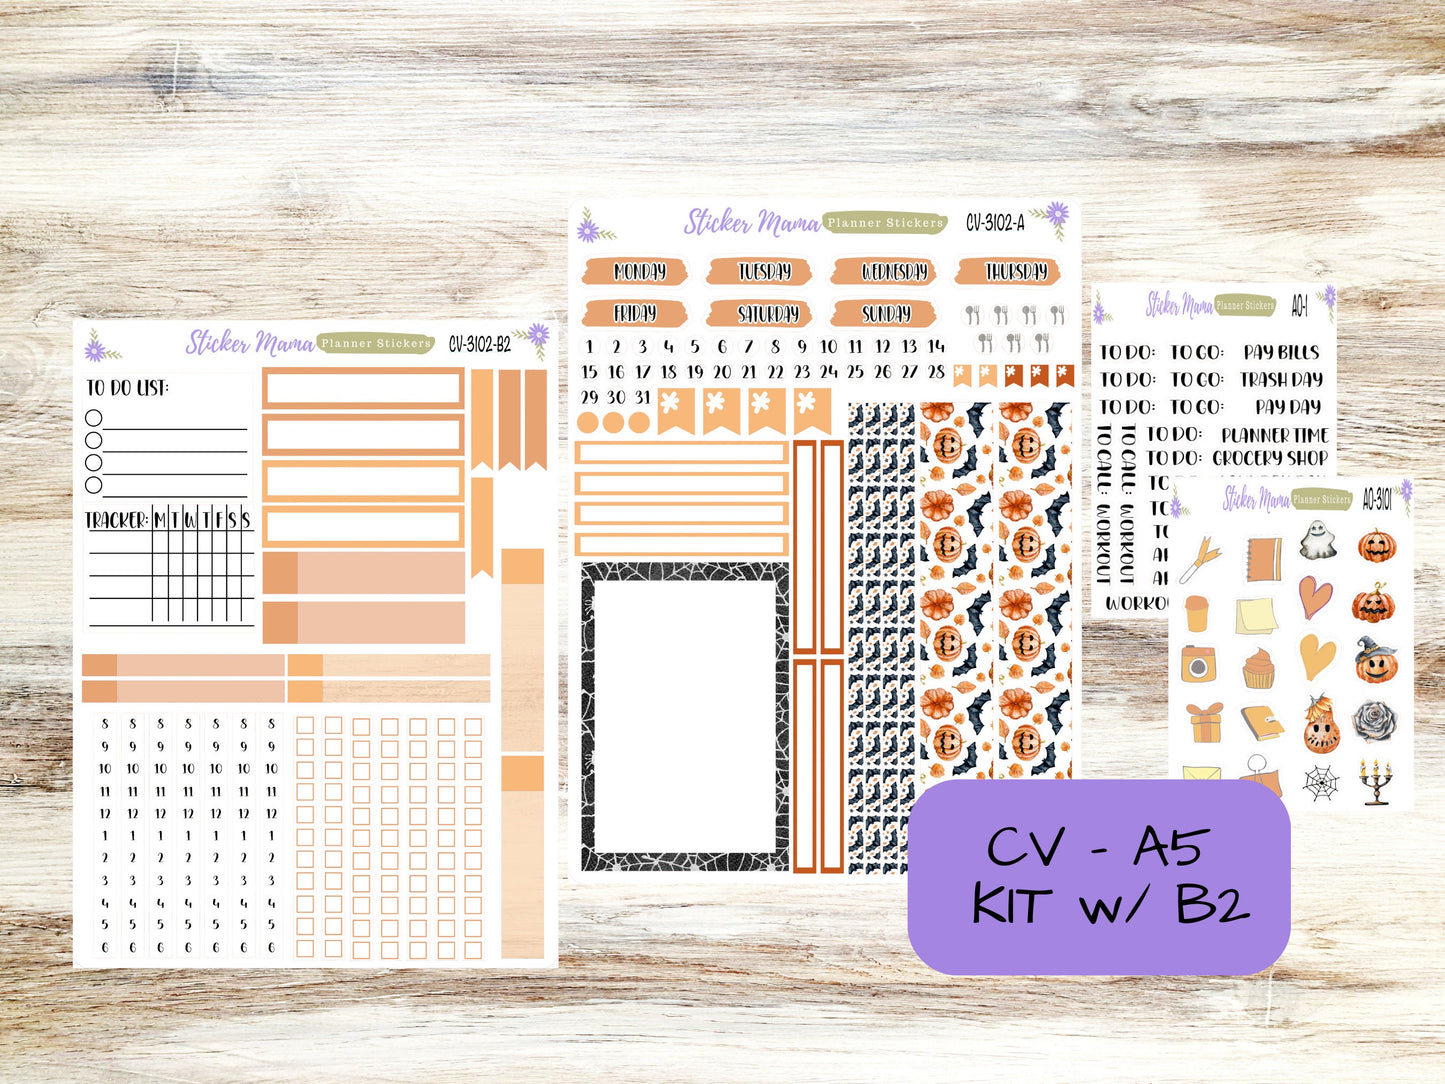 A5 COMPACT VERTICAL-Kit #3102 || Jack - O - Lantern  - Compact Vertical - Planner Stickers - Erin Condren Compact Vertical Weekly Kit